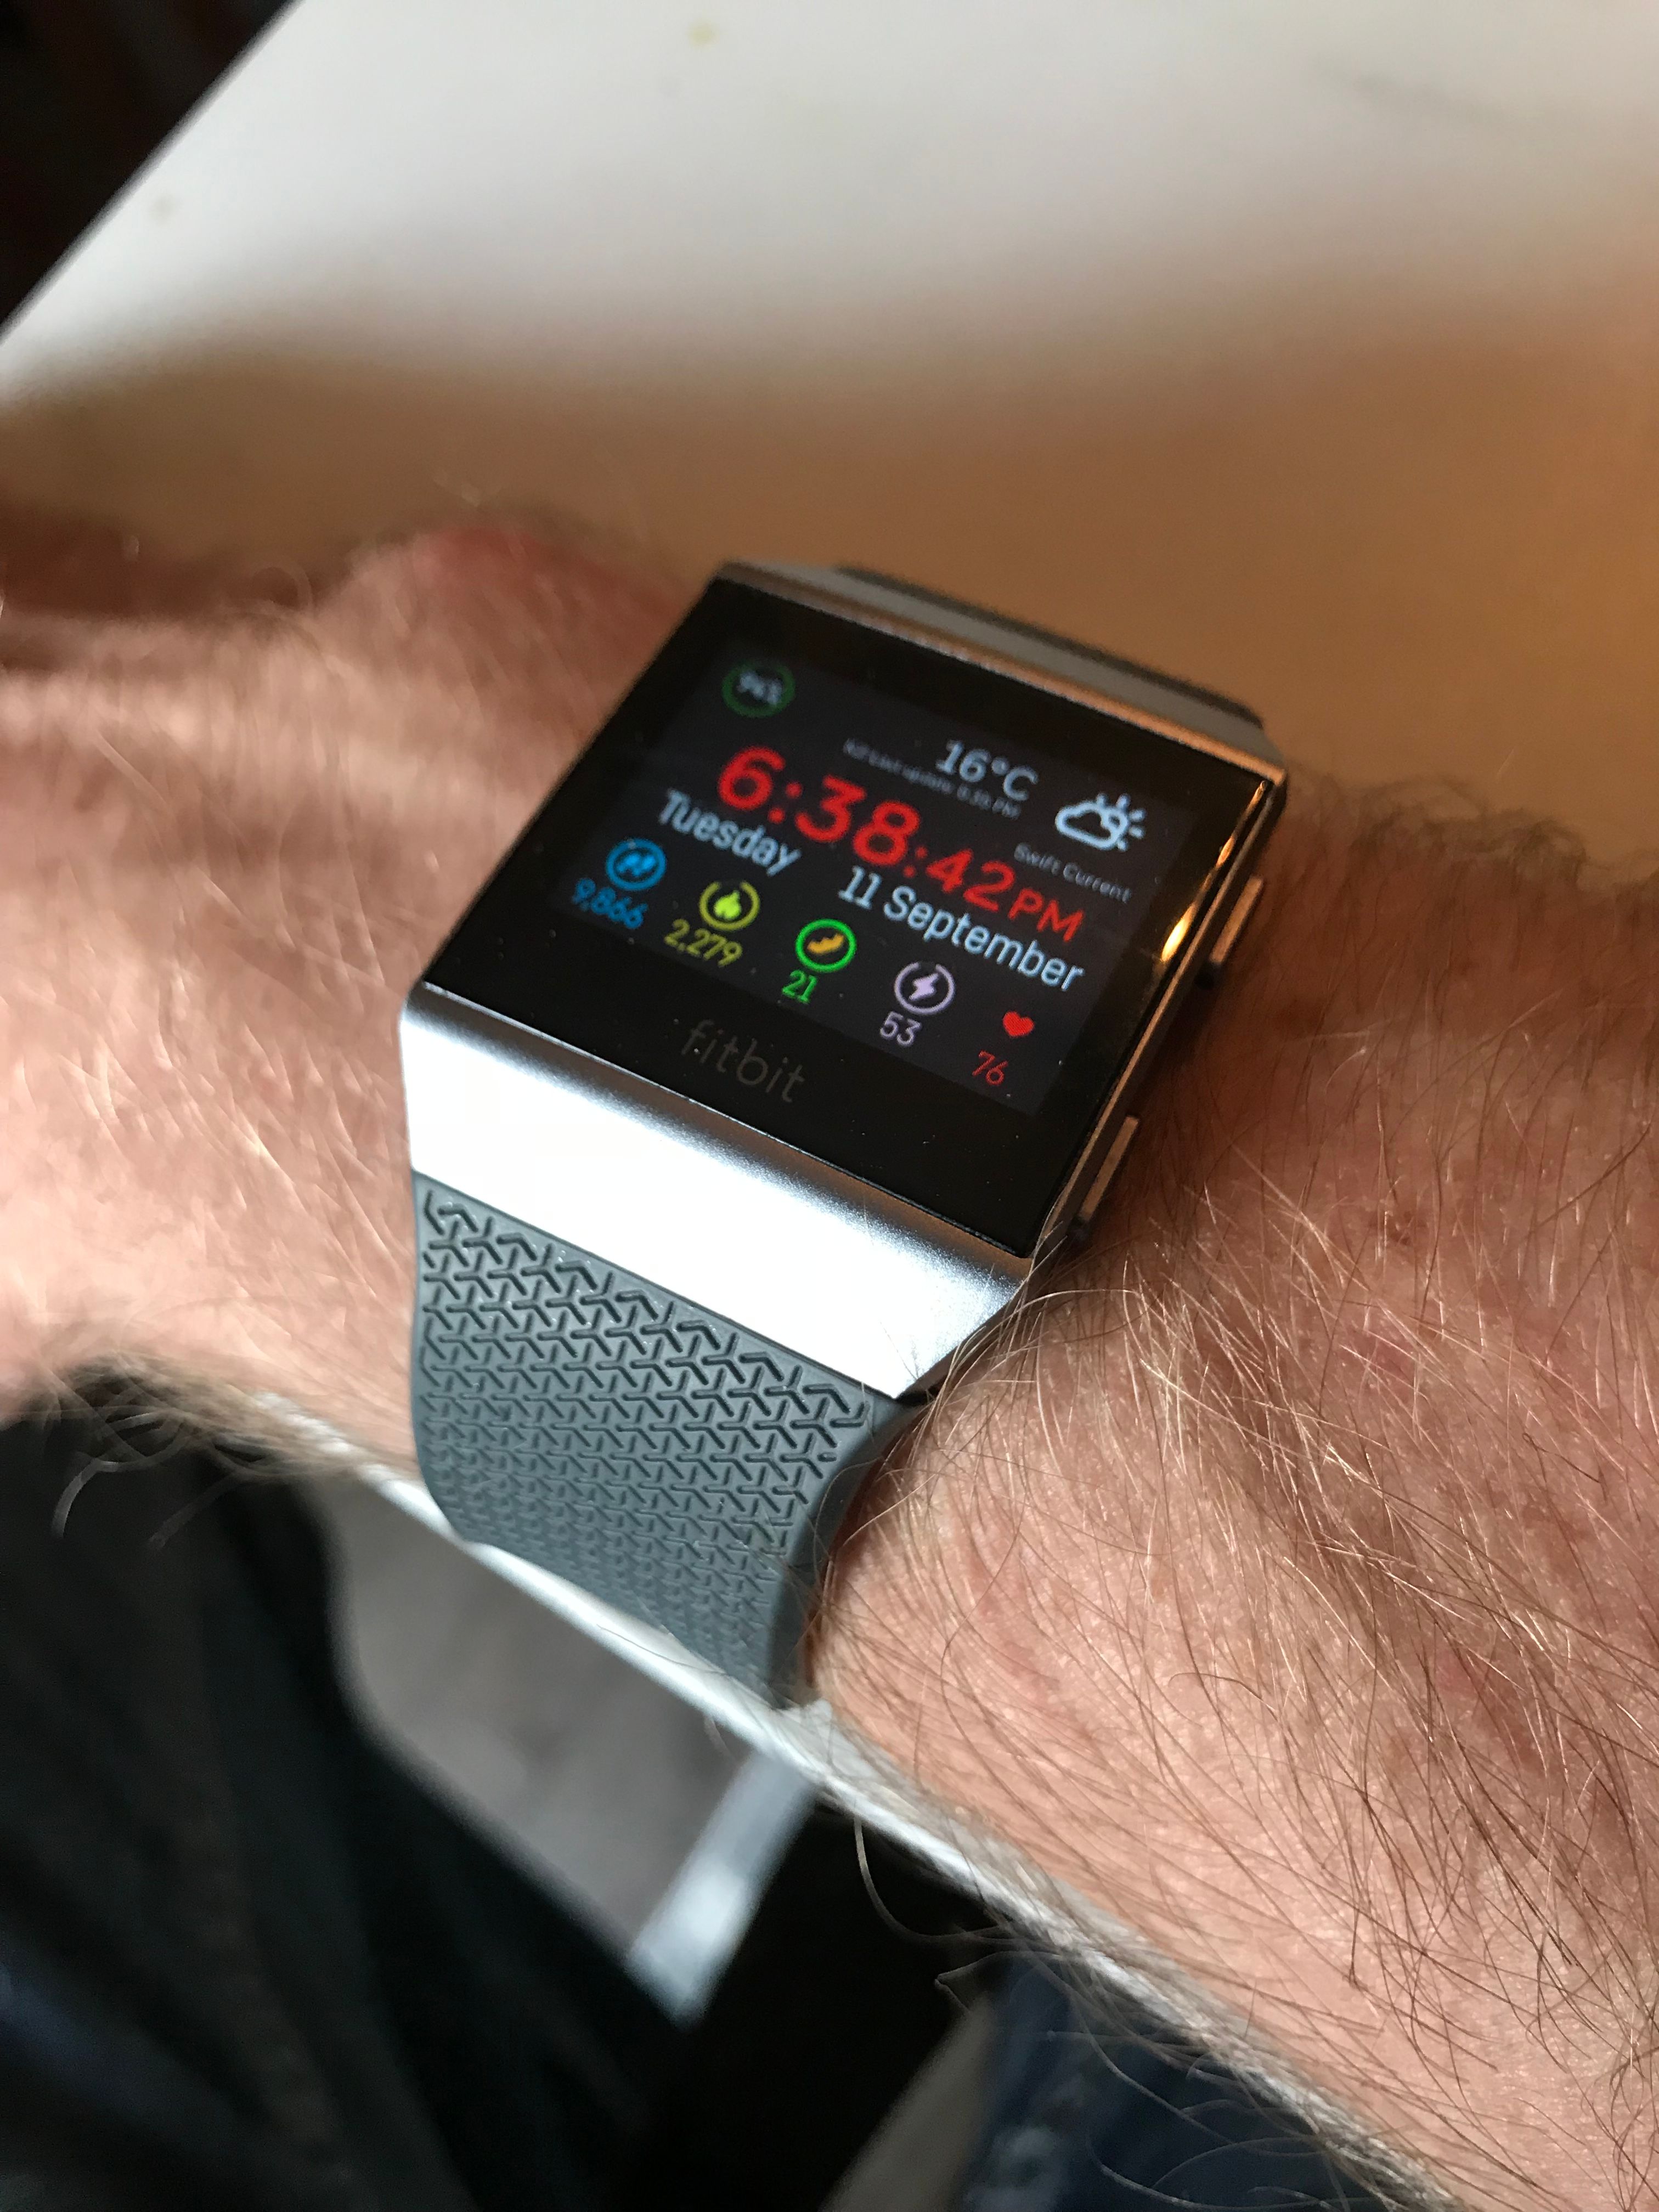 Details about   Fitbit Ionic Smartwatch FB503 Ink Blue/Ice Grey/Silver Grey AD Edition 